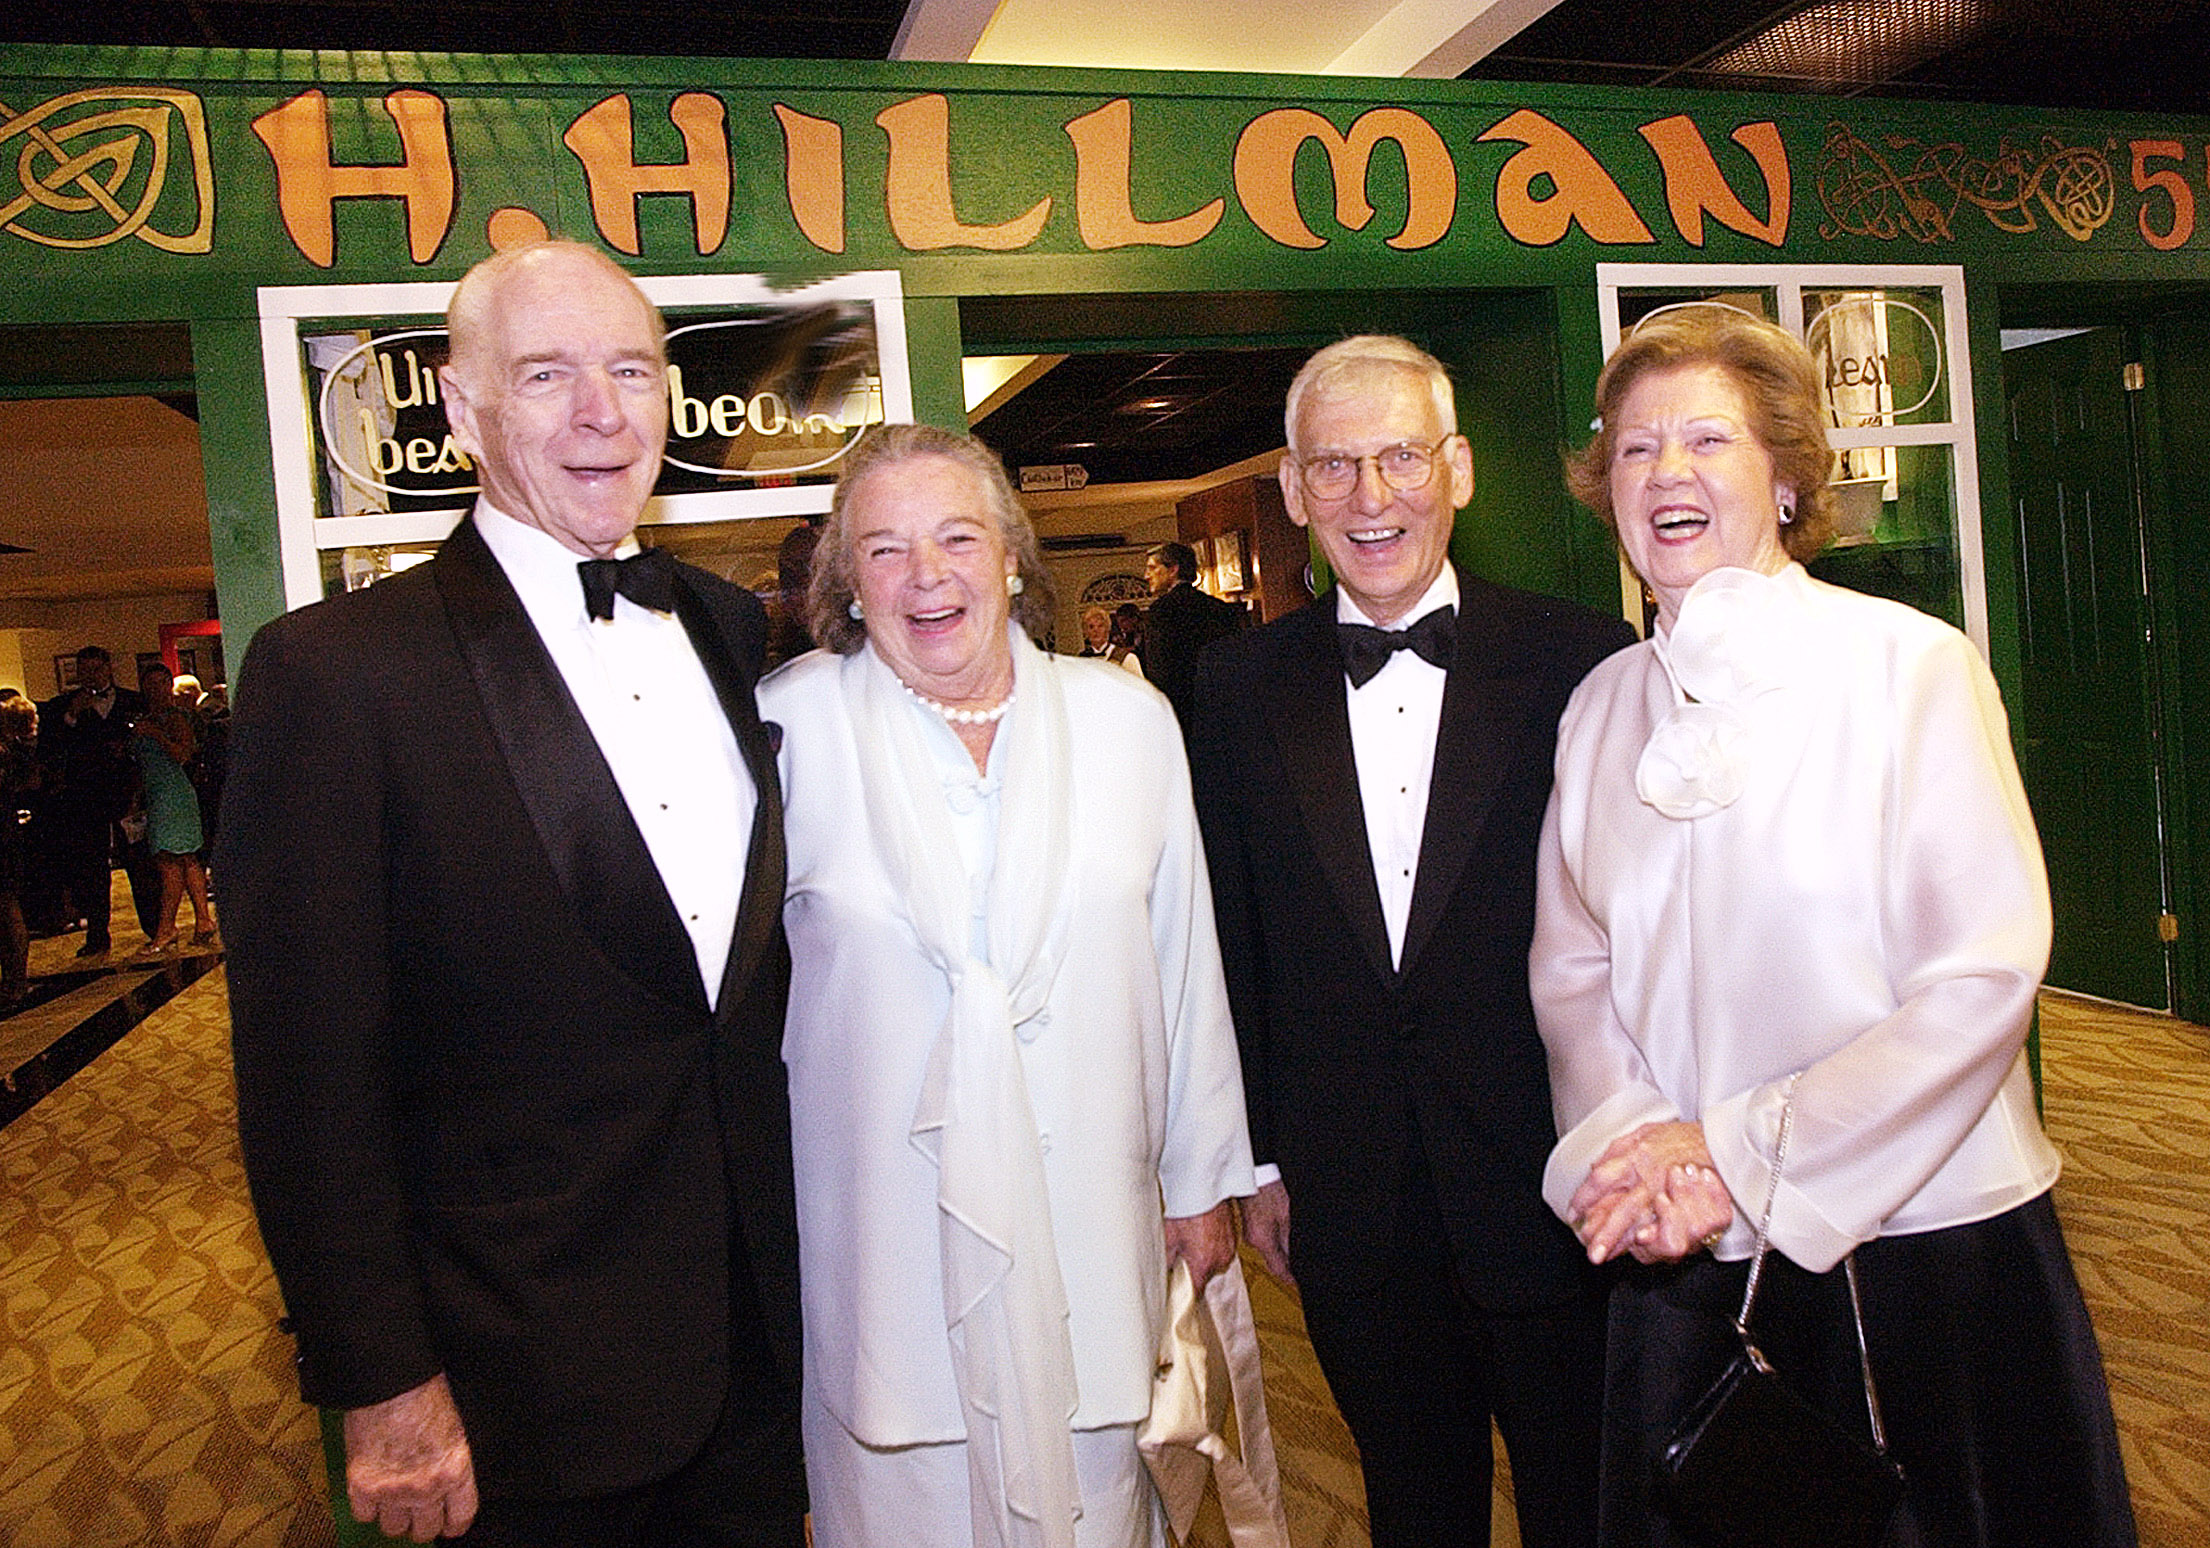 Henry and Elsie Hillman, left, and Dan and Pat Rooney, right, make an appearance for the American Ireland Fund in 2004. (John Heller/Post-Gazette)